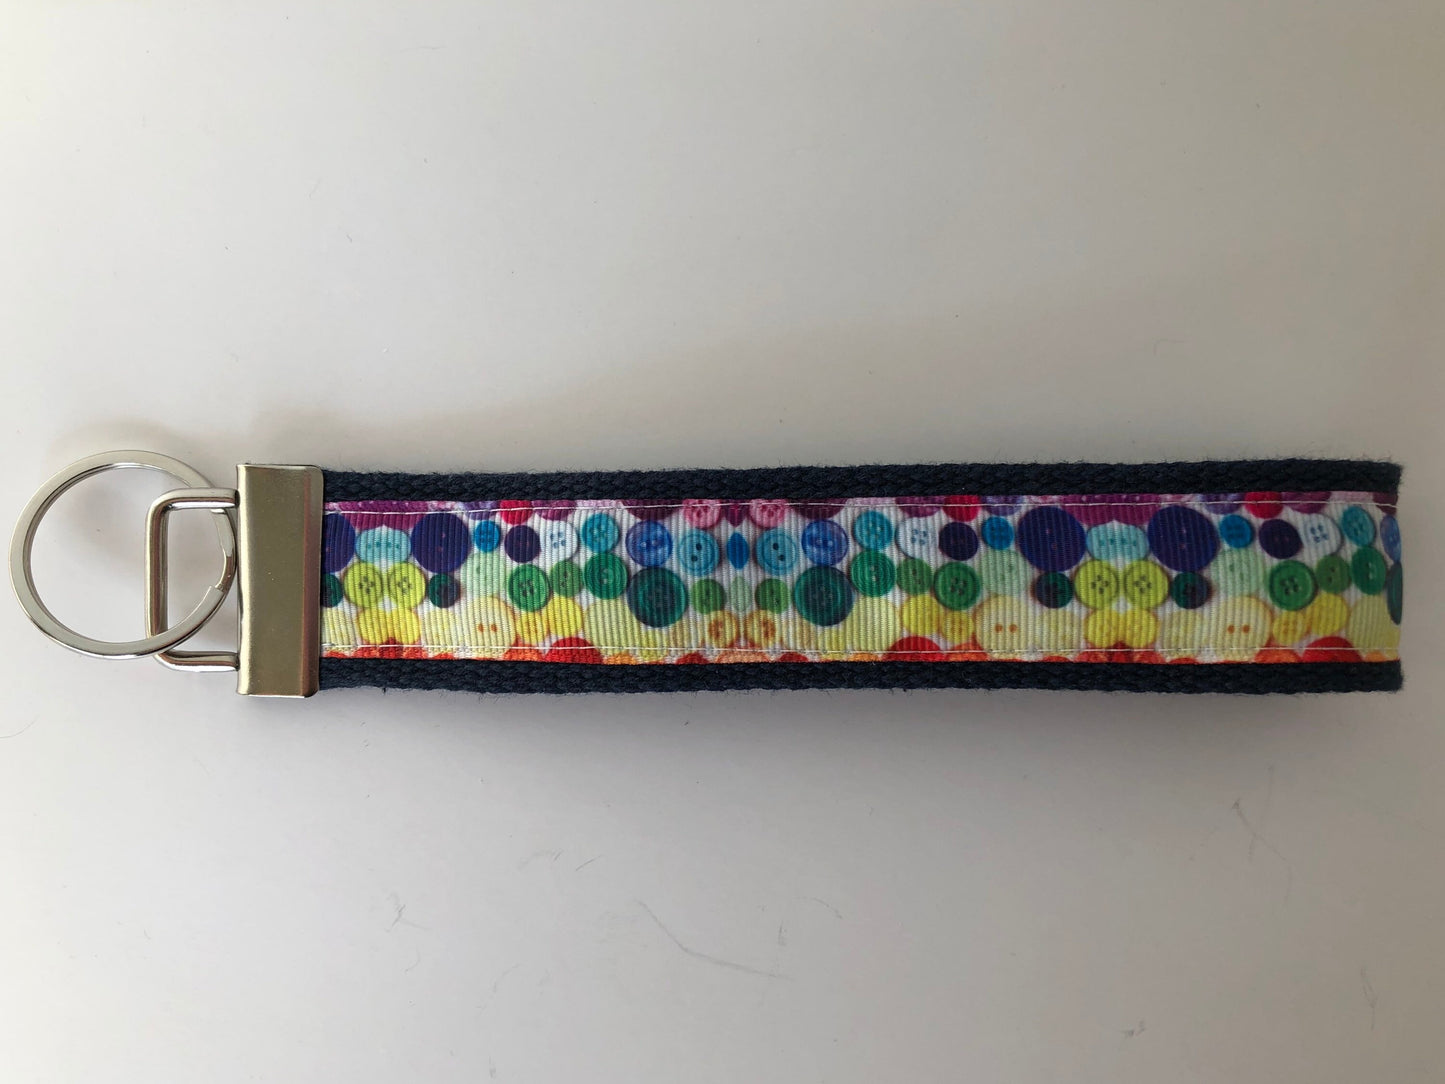 Rainbow Buttons Key Chain, Sewing Themed Key Fob